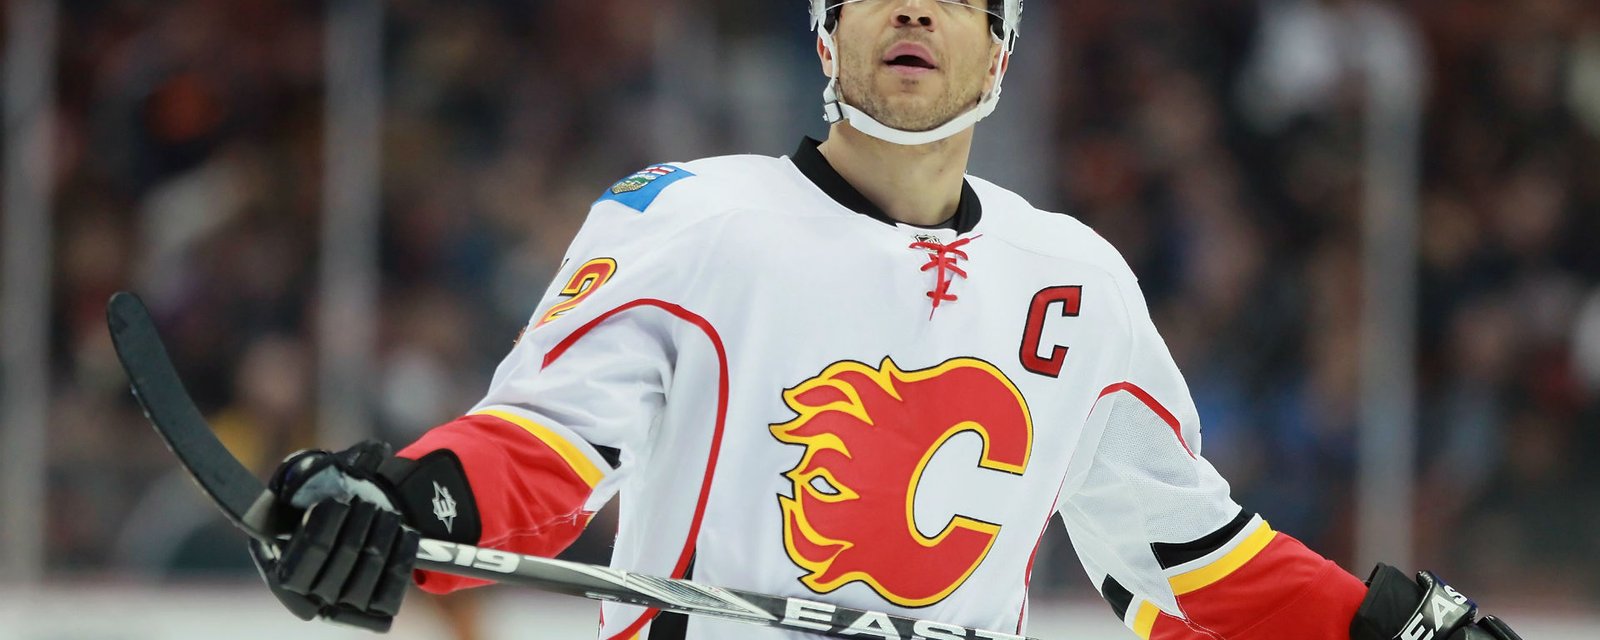 Jarome Iginla delivers a powerful message to young black hockey players.